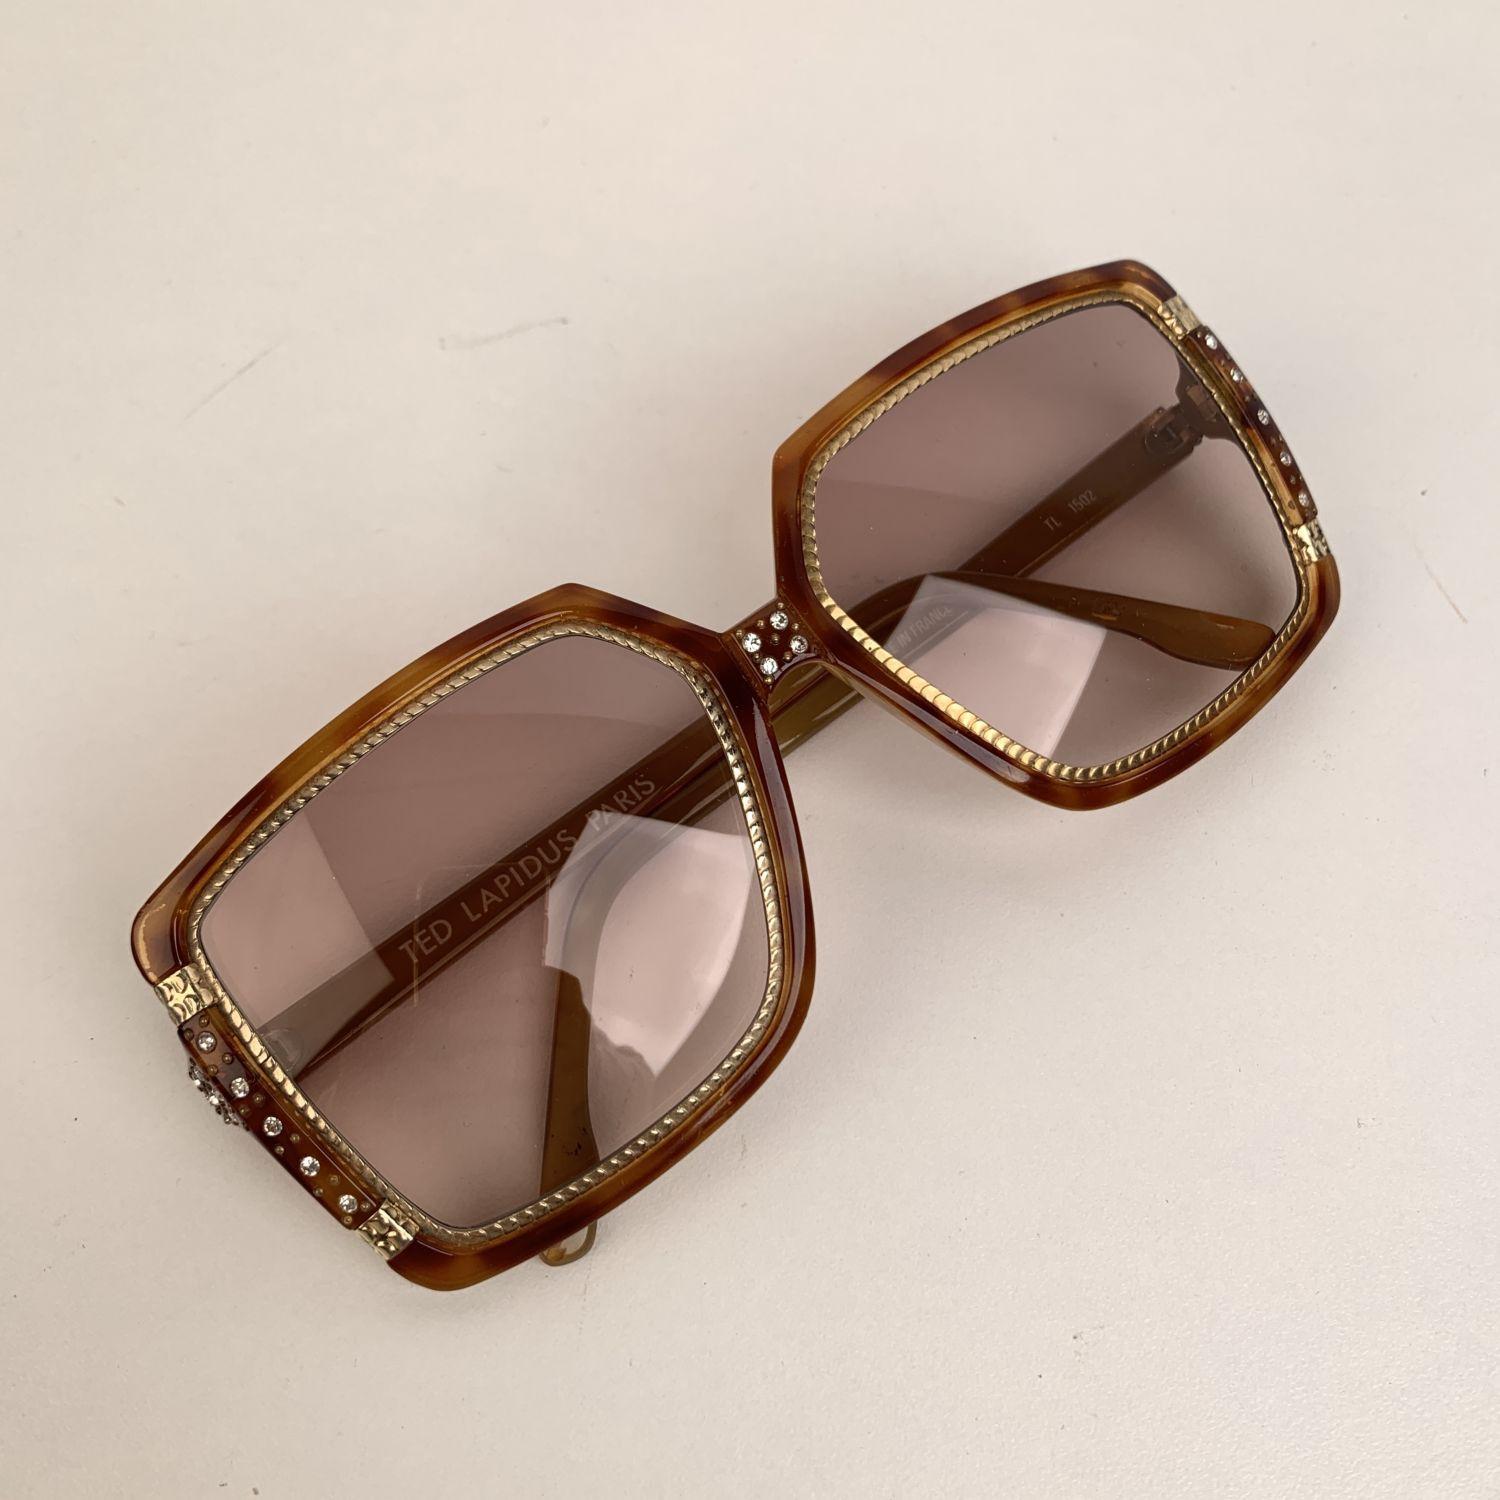 Rare vintage TED LAPIDUS oversized sunglasses mod. TL1502. Made in France. Brown oversized square tortoiseshell acetate frame with gold metal accents and crystal embellishment. Brown gradient lenses. 100% UV supreme quality